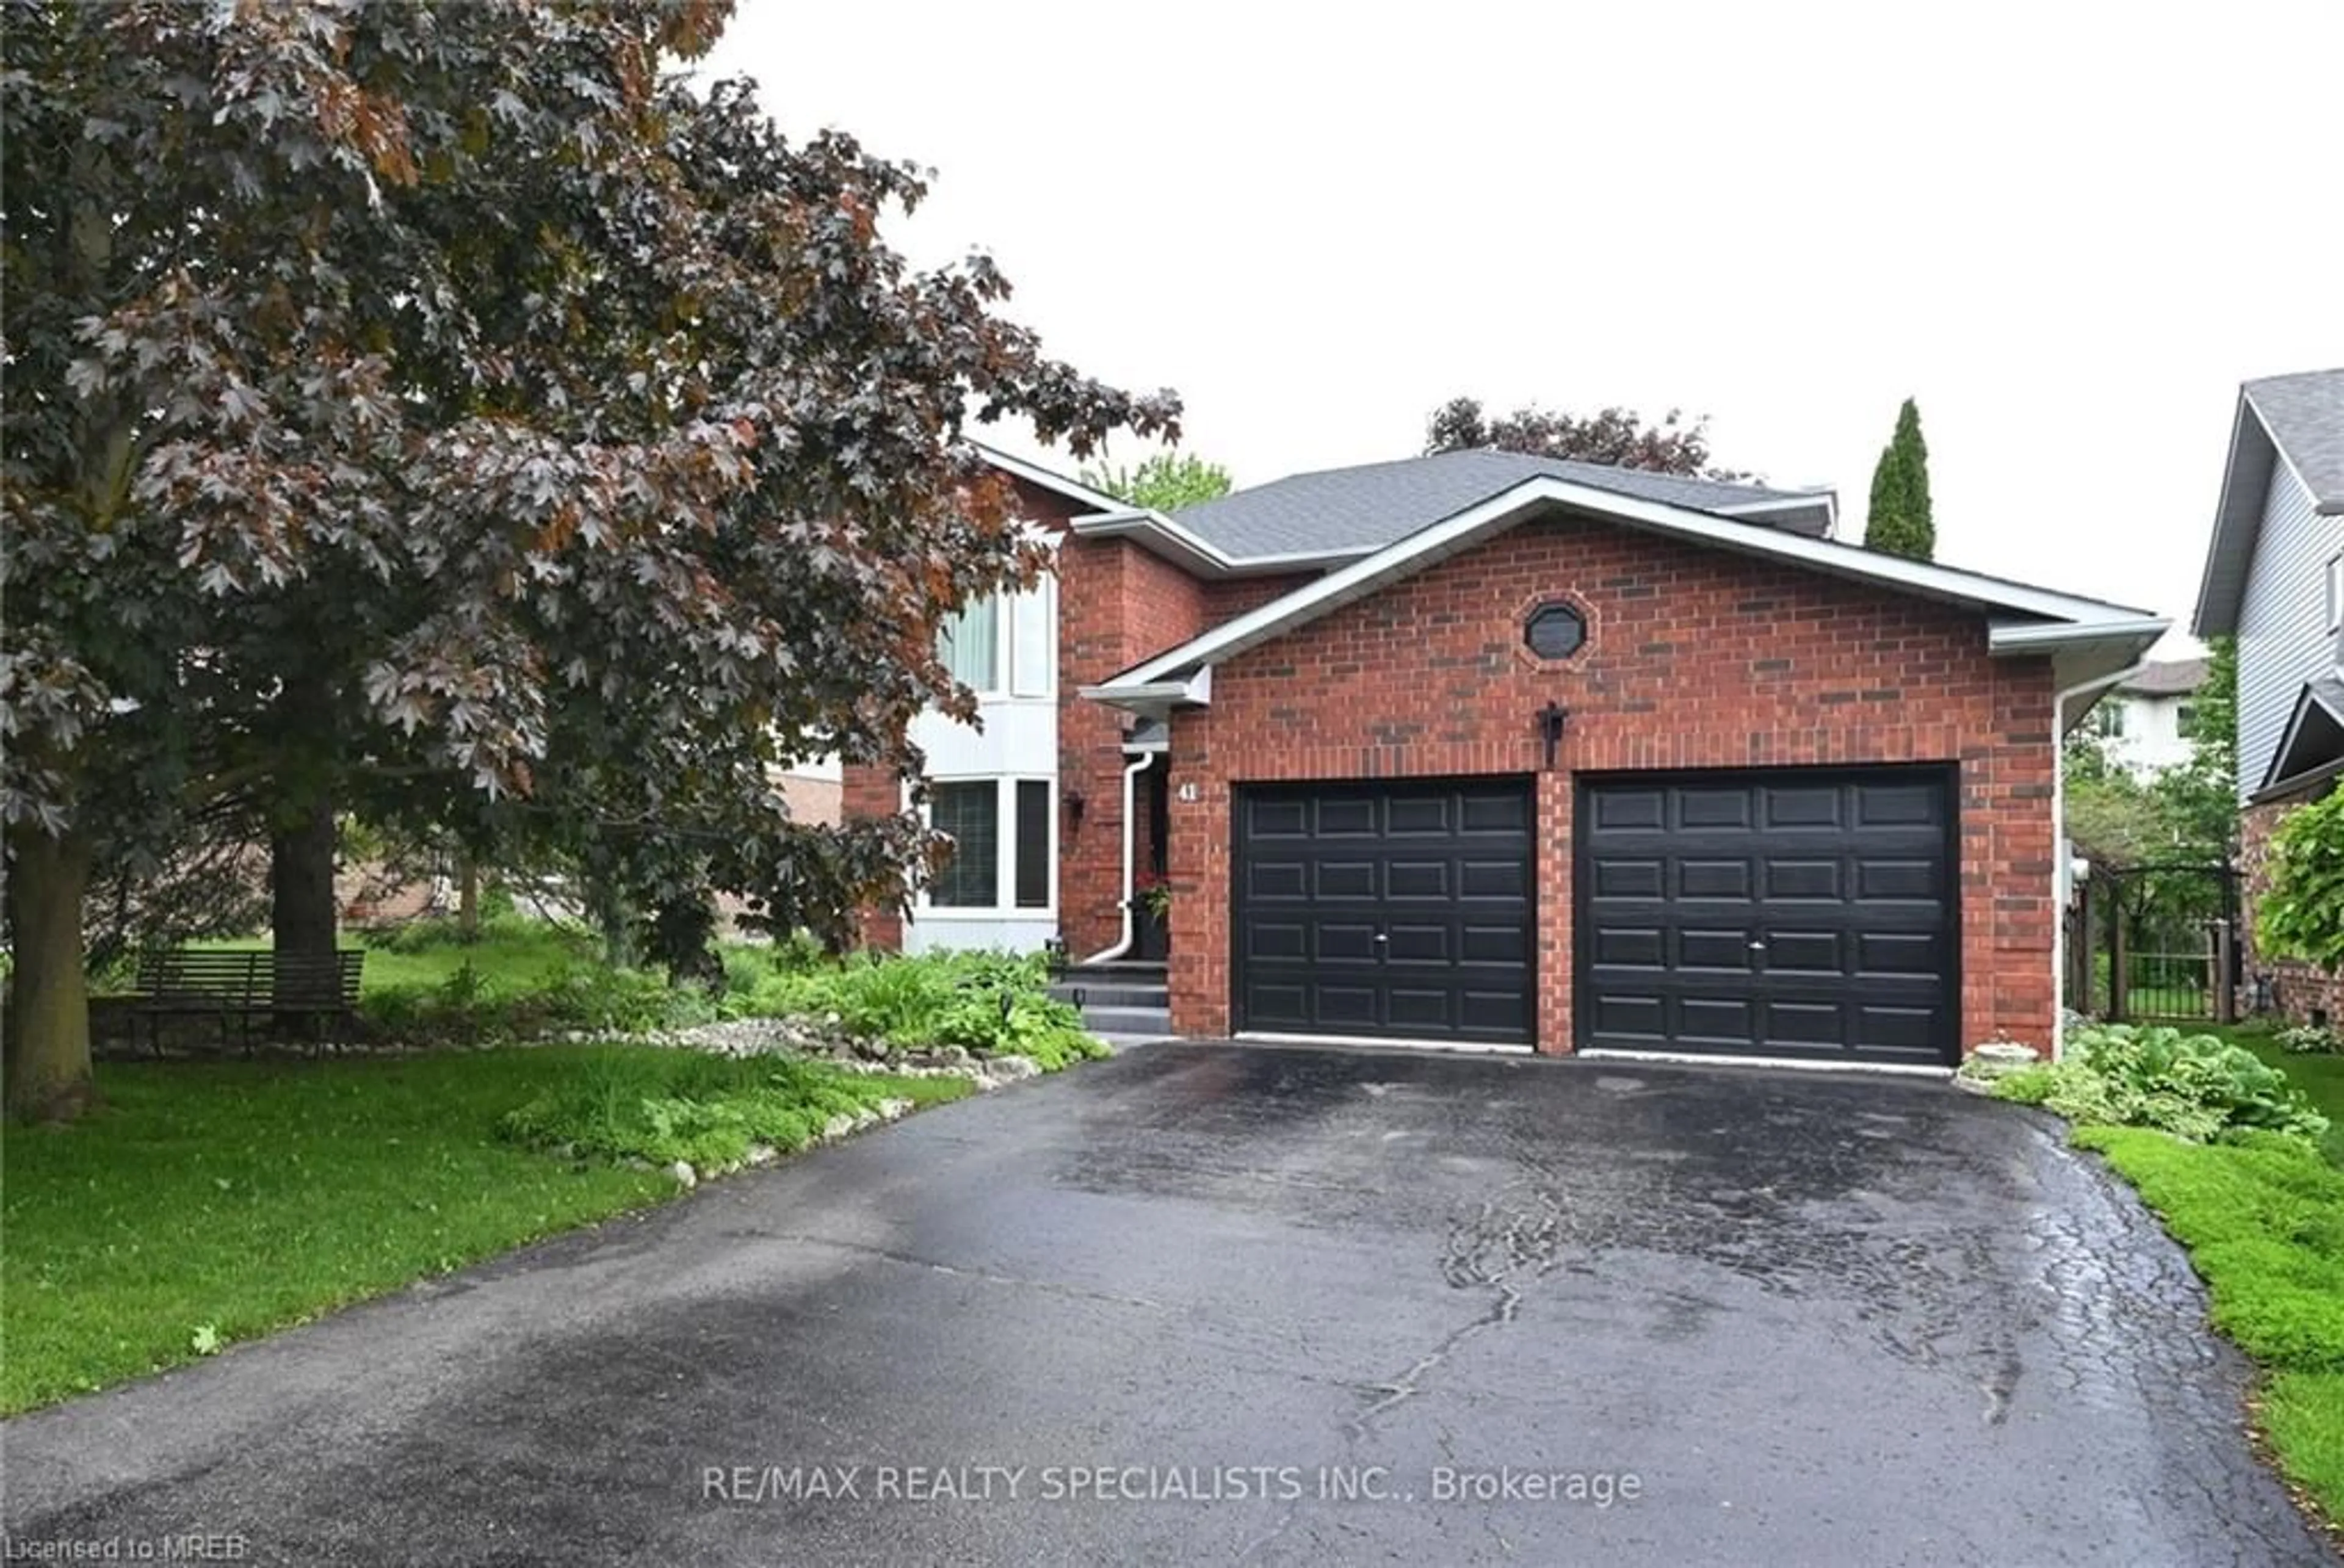 Home with brick exterior material for 41 Passmore Ave, Orangeville Ontario L9W 4K4